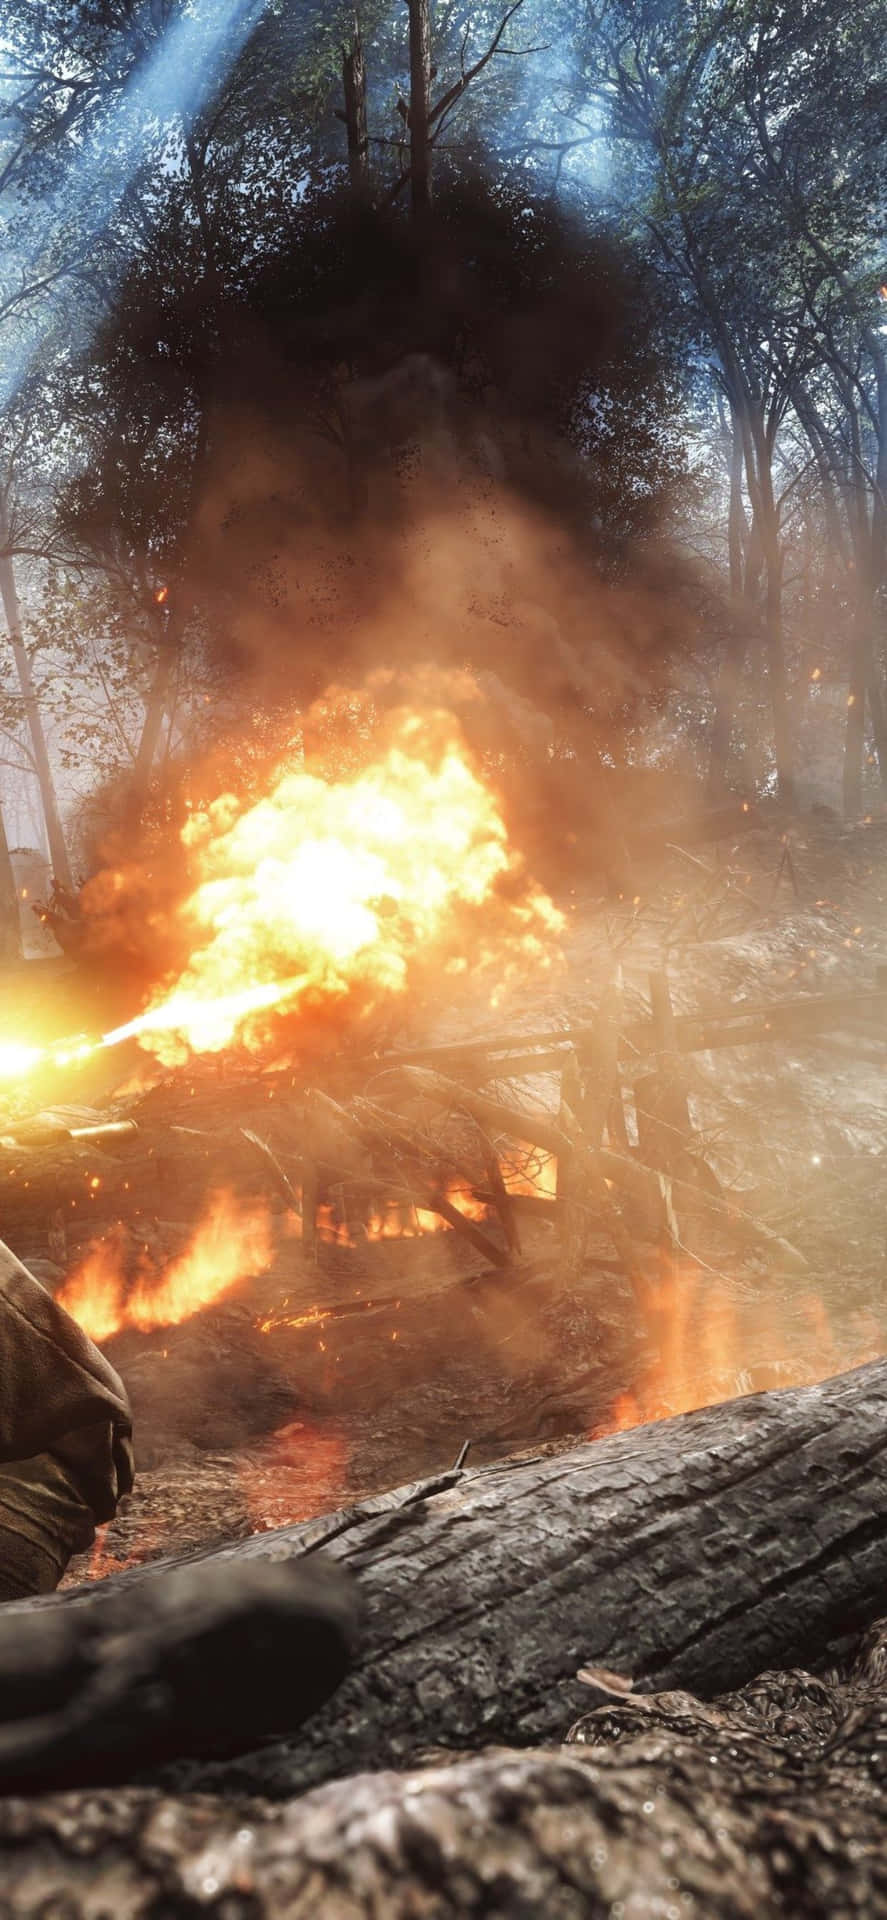 A Soldier Is Standing In The Woods With A Fire